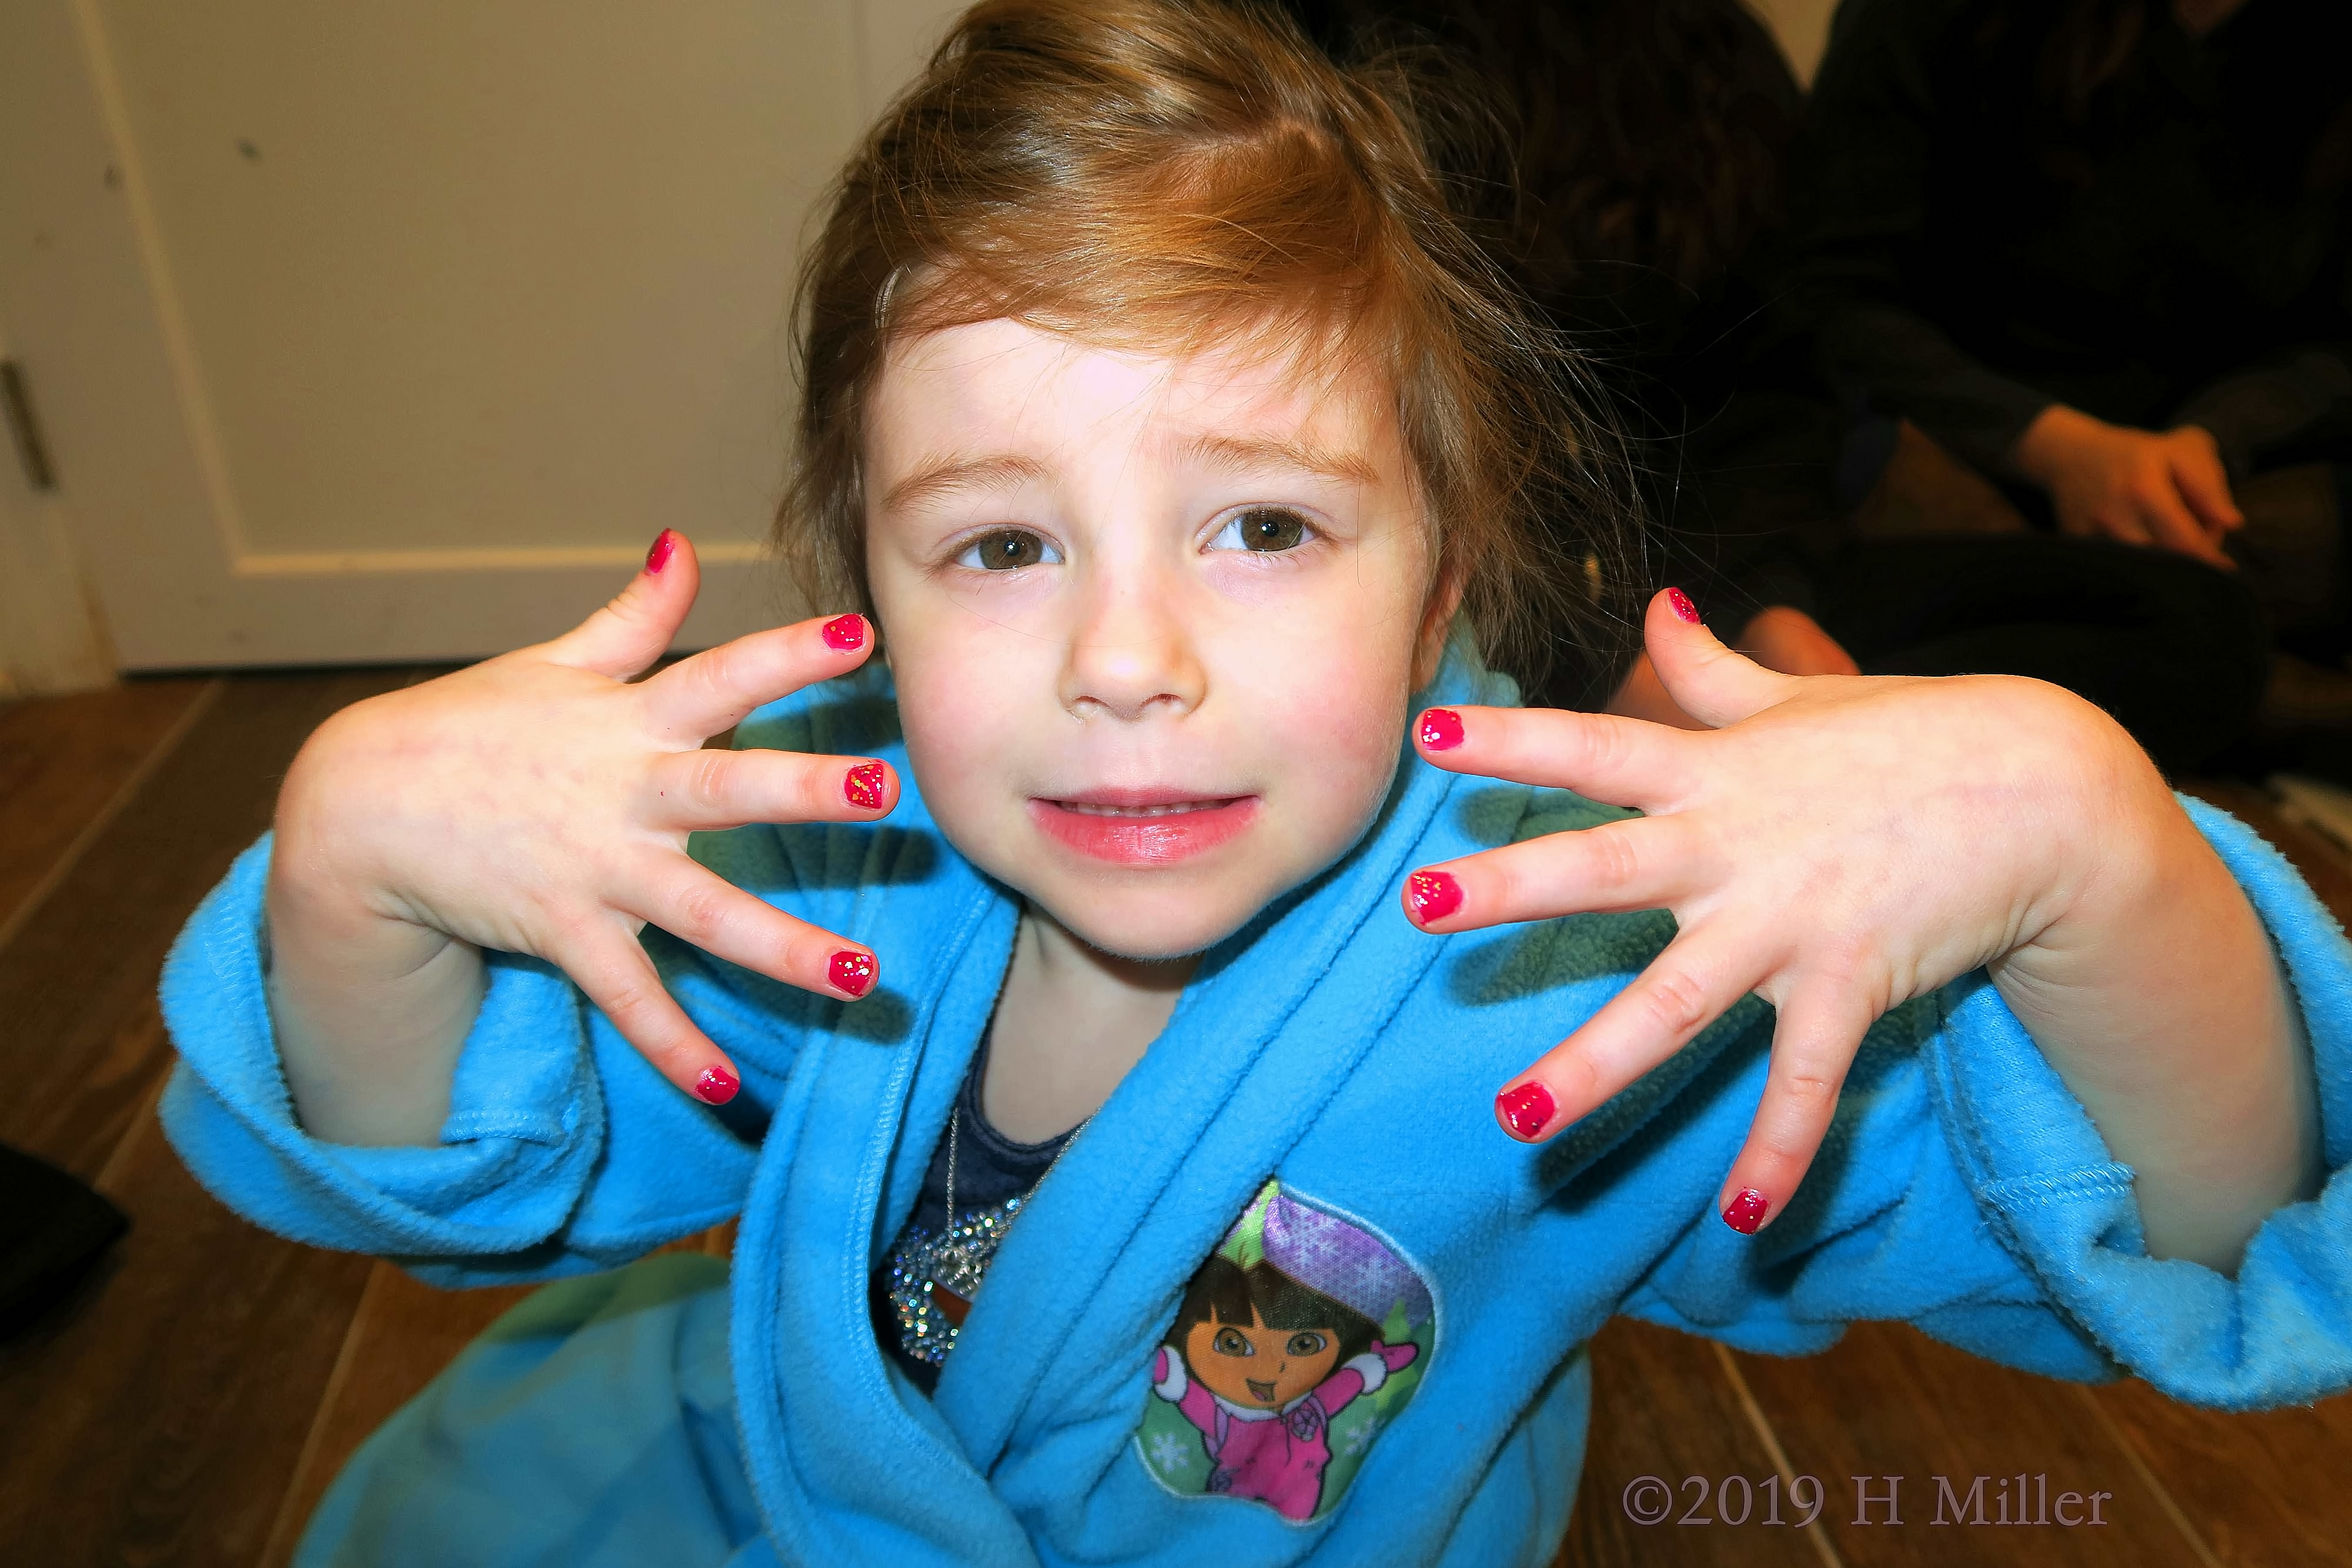 Spa Party Guest In Dora Kids Spa Robe Showing Her Girls Mini Mani!